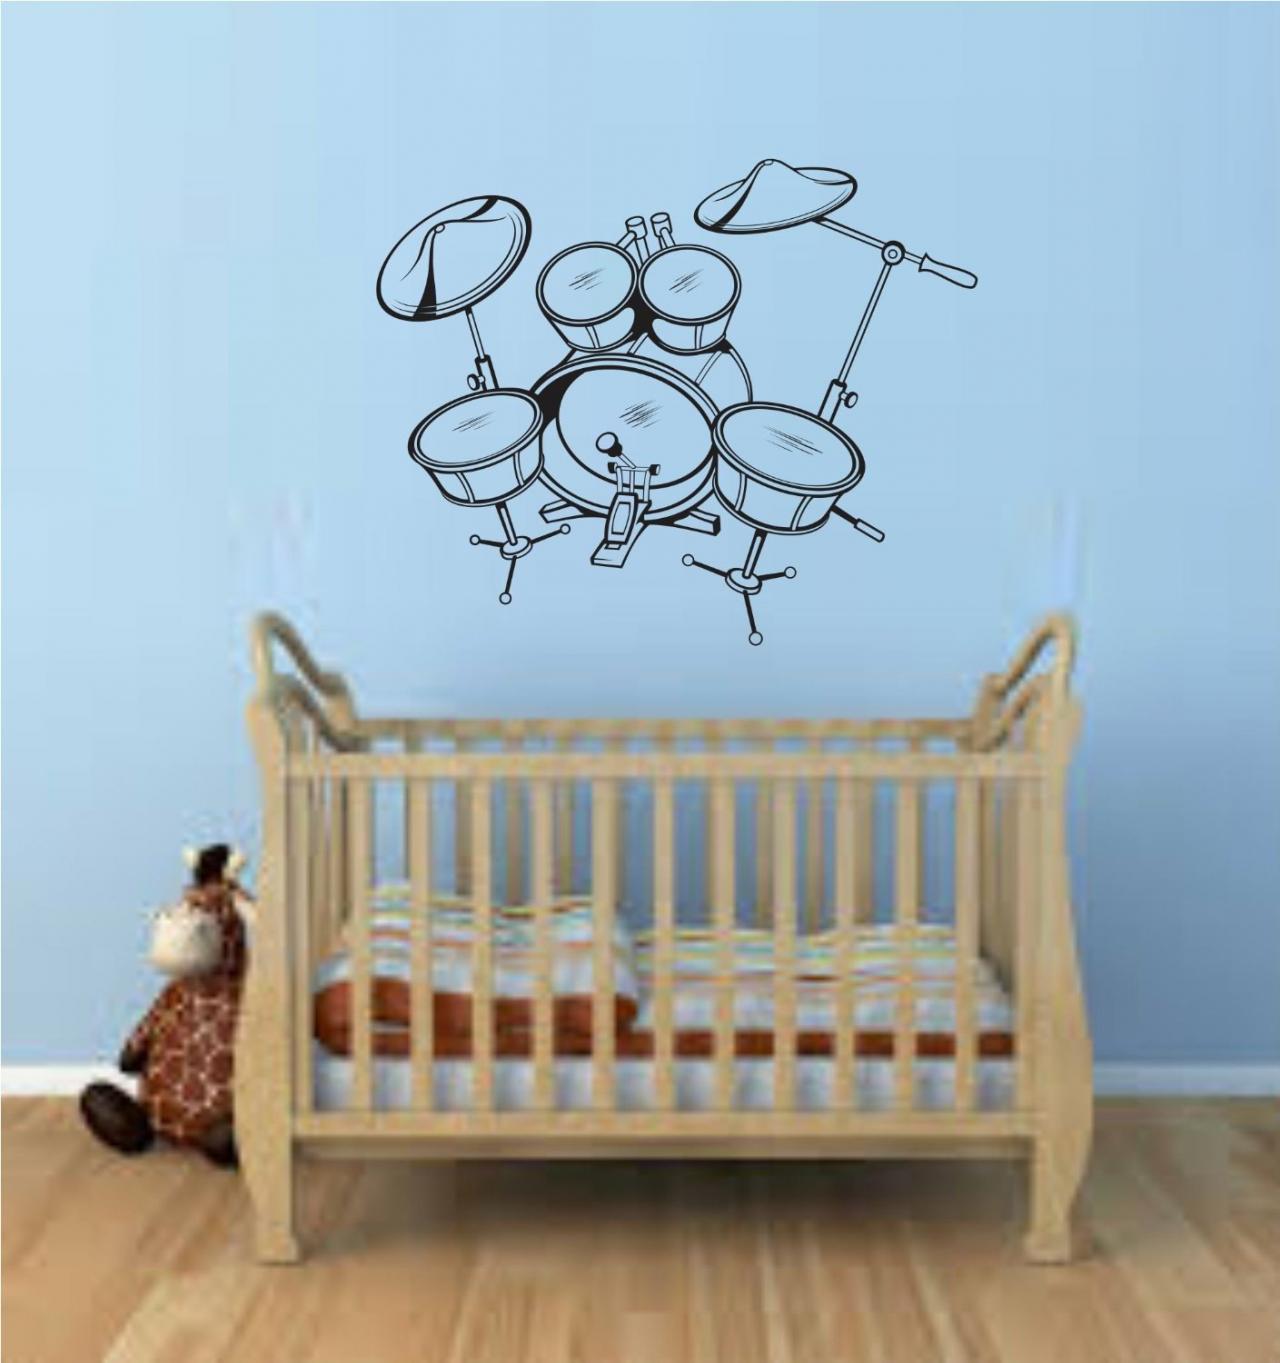 Drum SET Version 106 Wall Mural Decal Sticker Music Drums Drummer Band Drumstick Percussion I